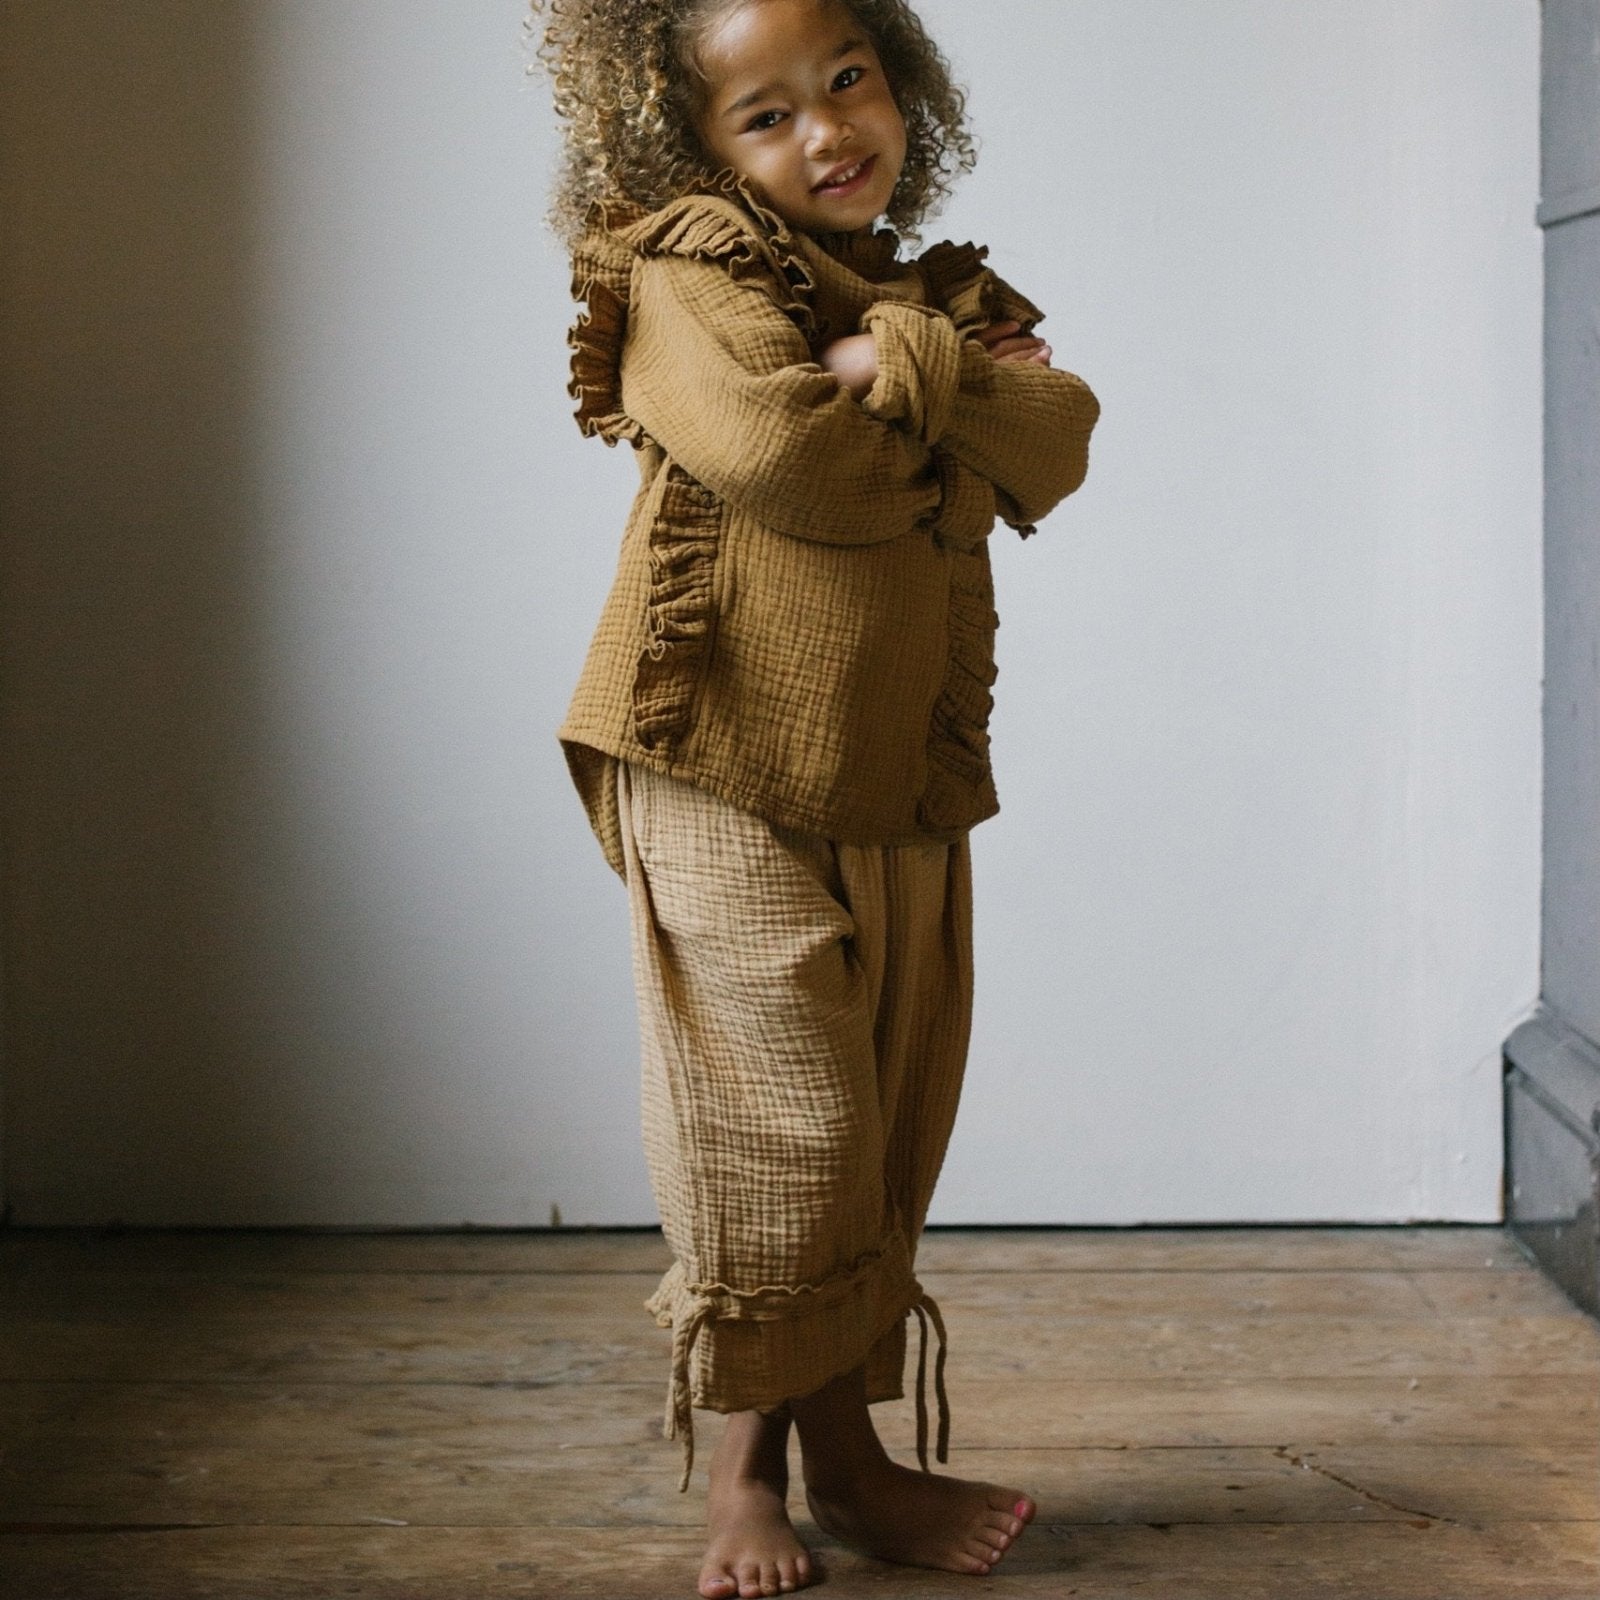 Lynn Ruffle Pants - Sand find Stylish Fashion for Little People- at Little Foxx Concept Store